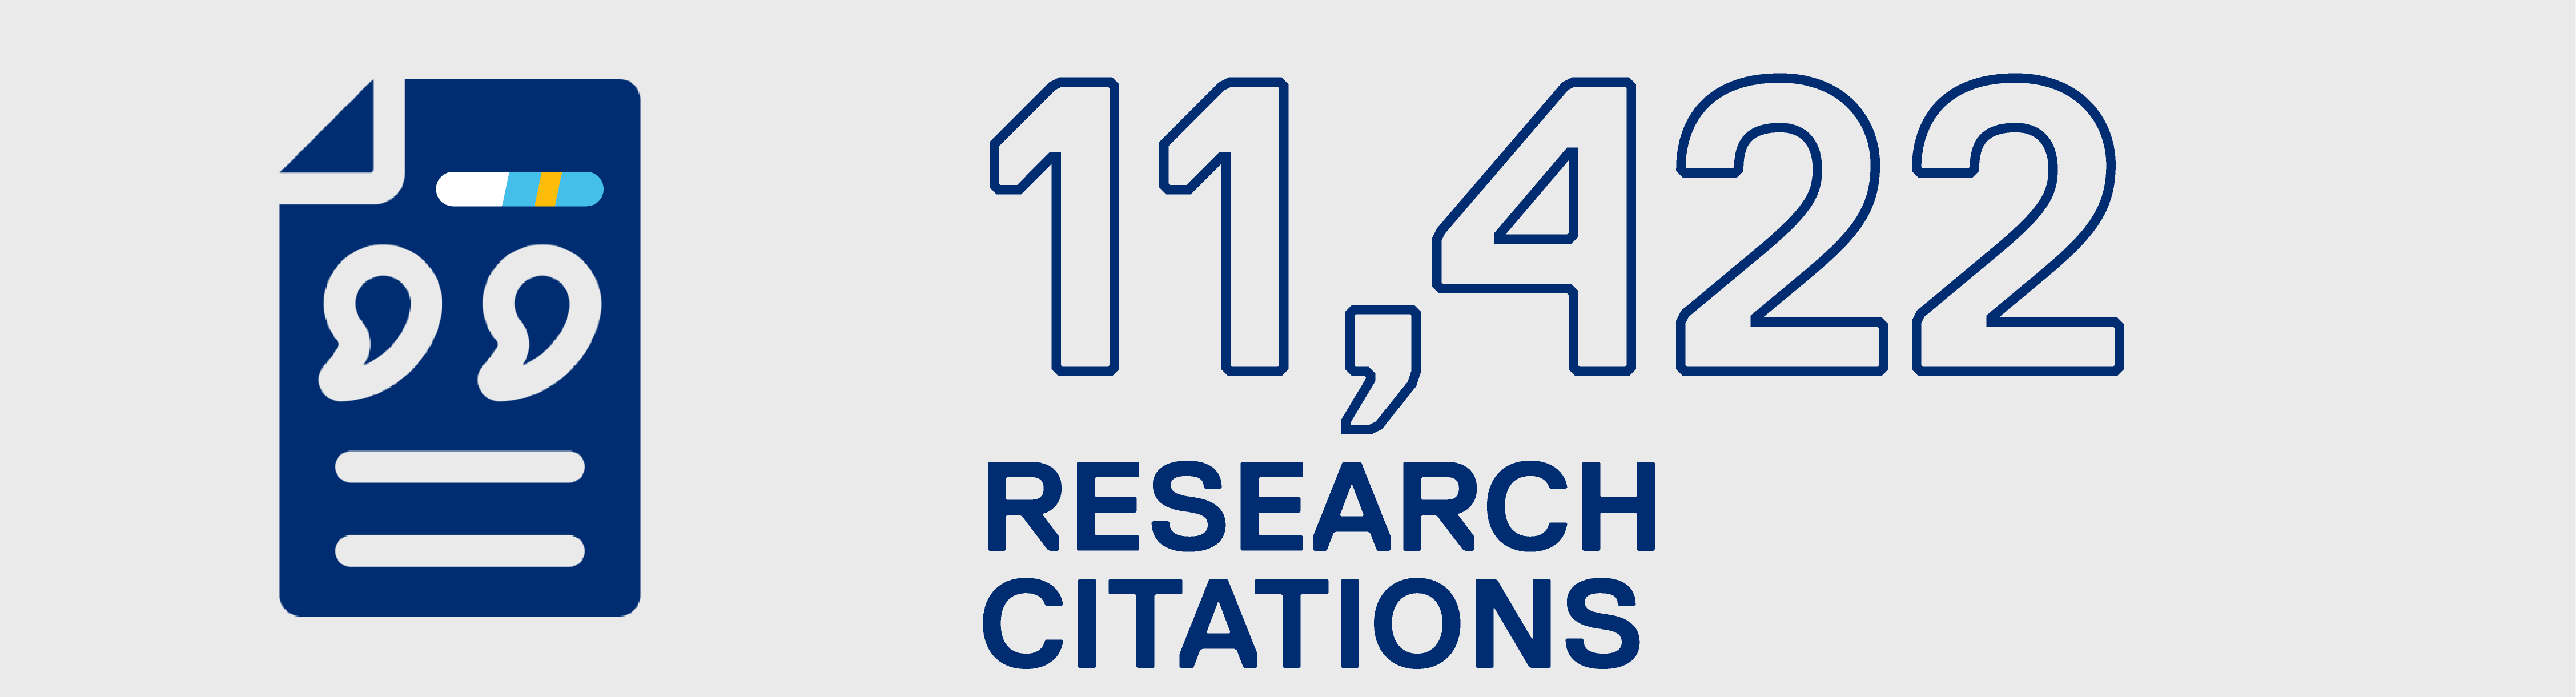 Eleven thousand four hundred twenty-two research citations